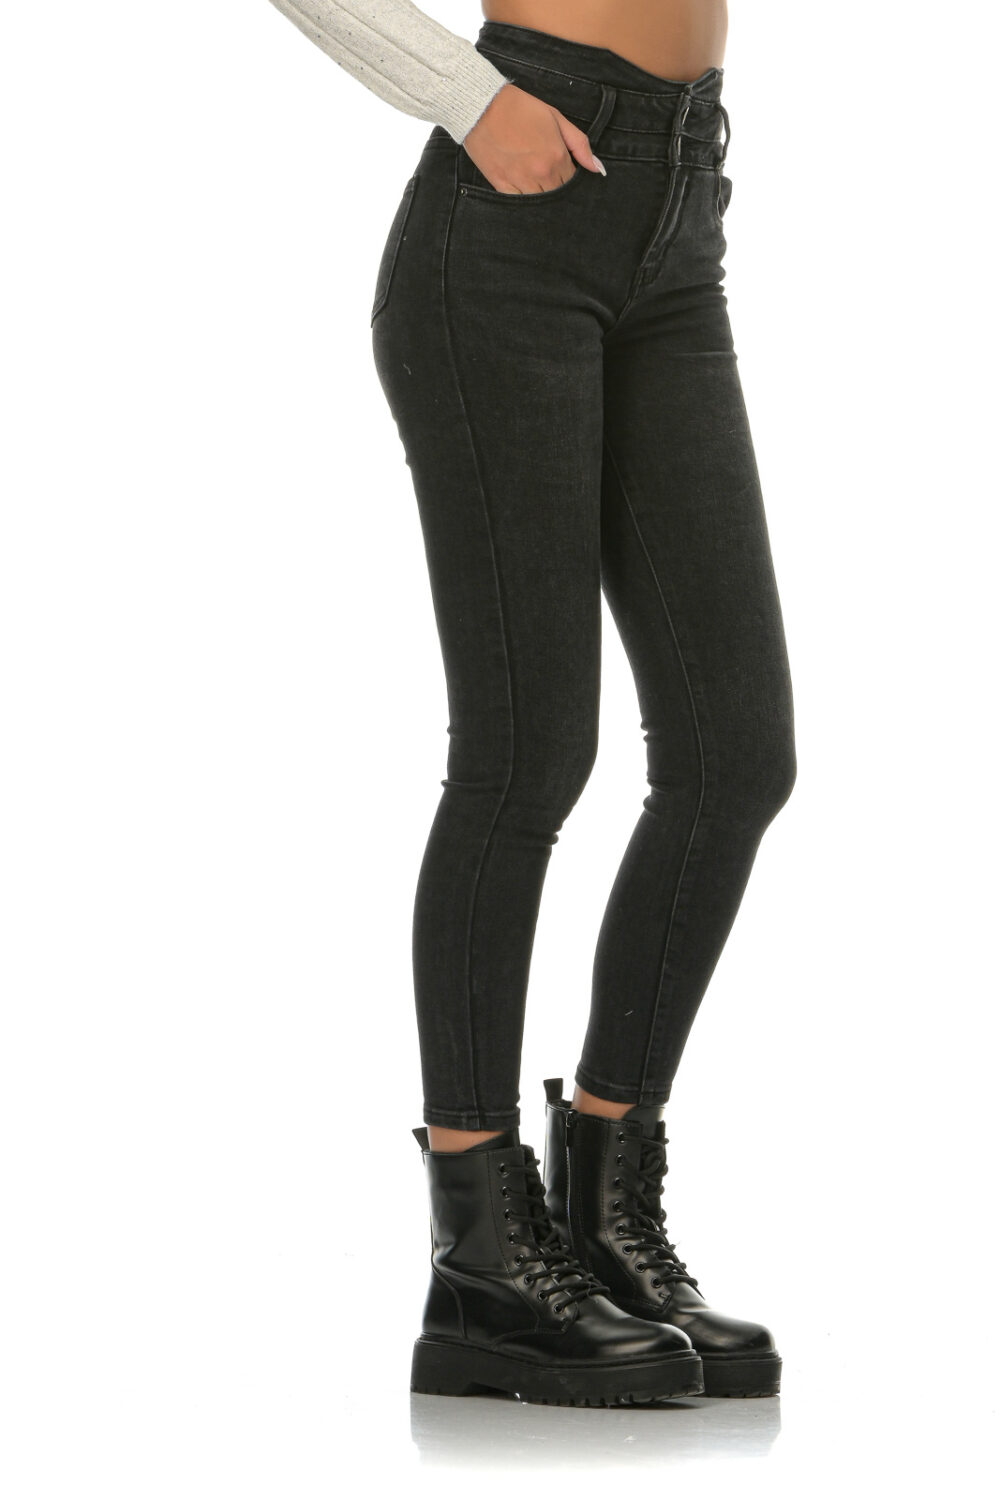 Black high-waisted jeans with buttons